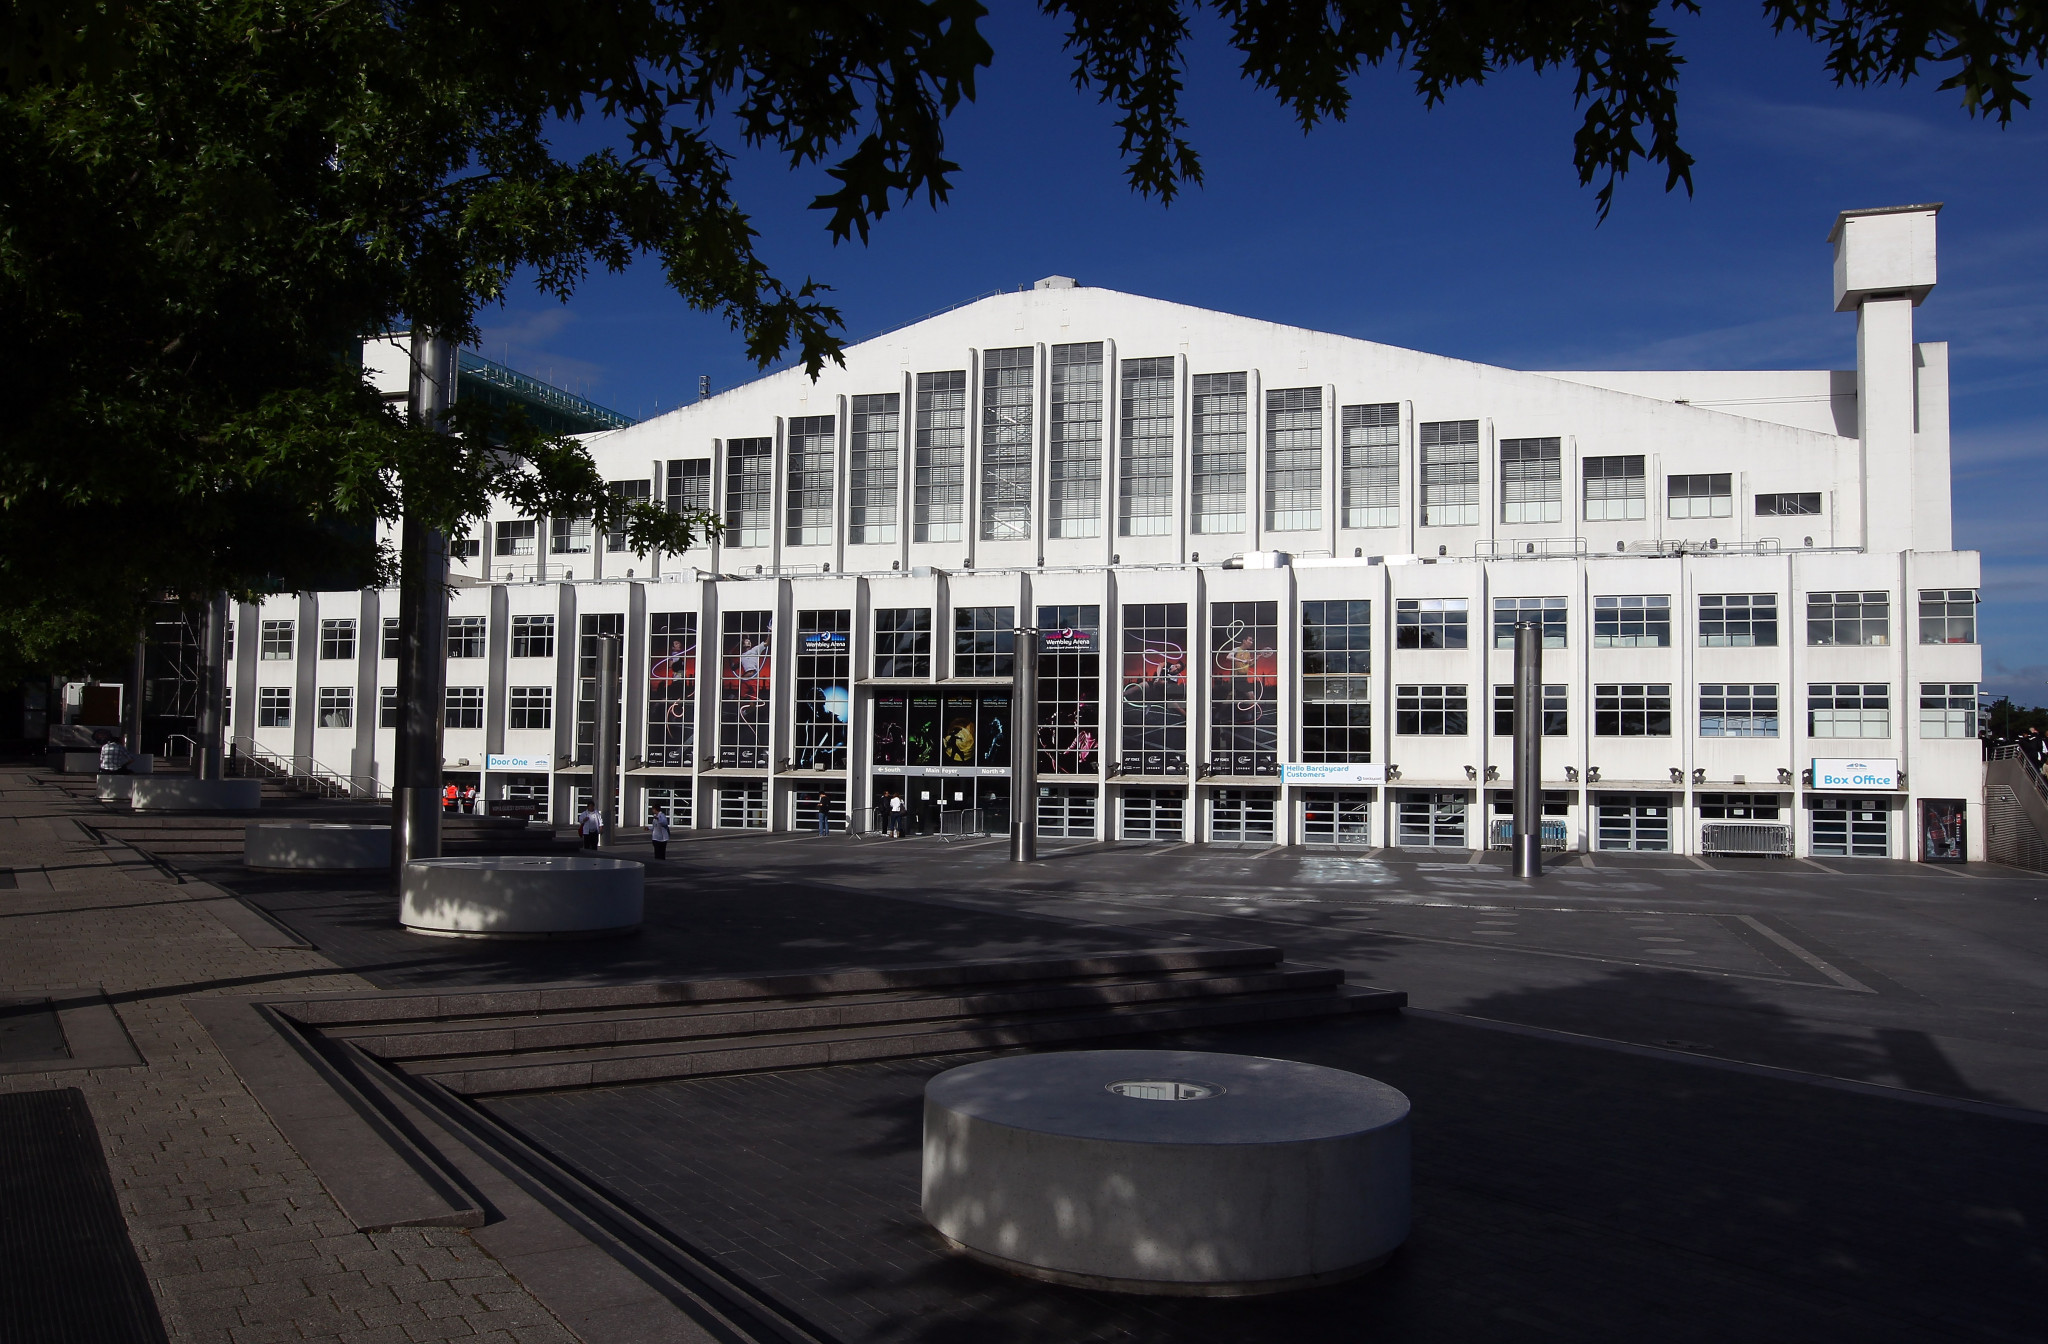 Wembley Arena in London is set to host the 2026 World Team Table Tennis Championships ©Getty Images